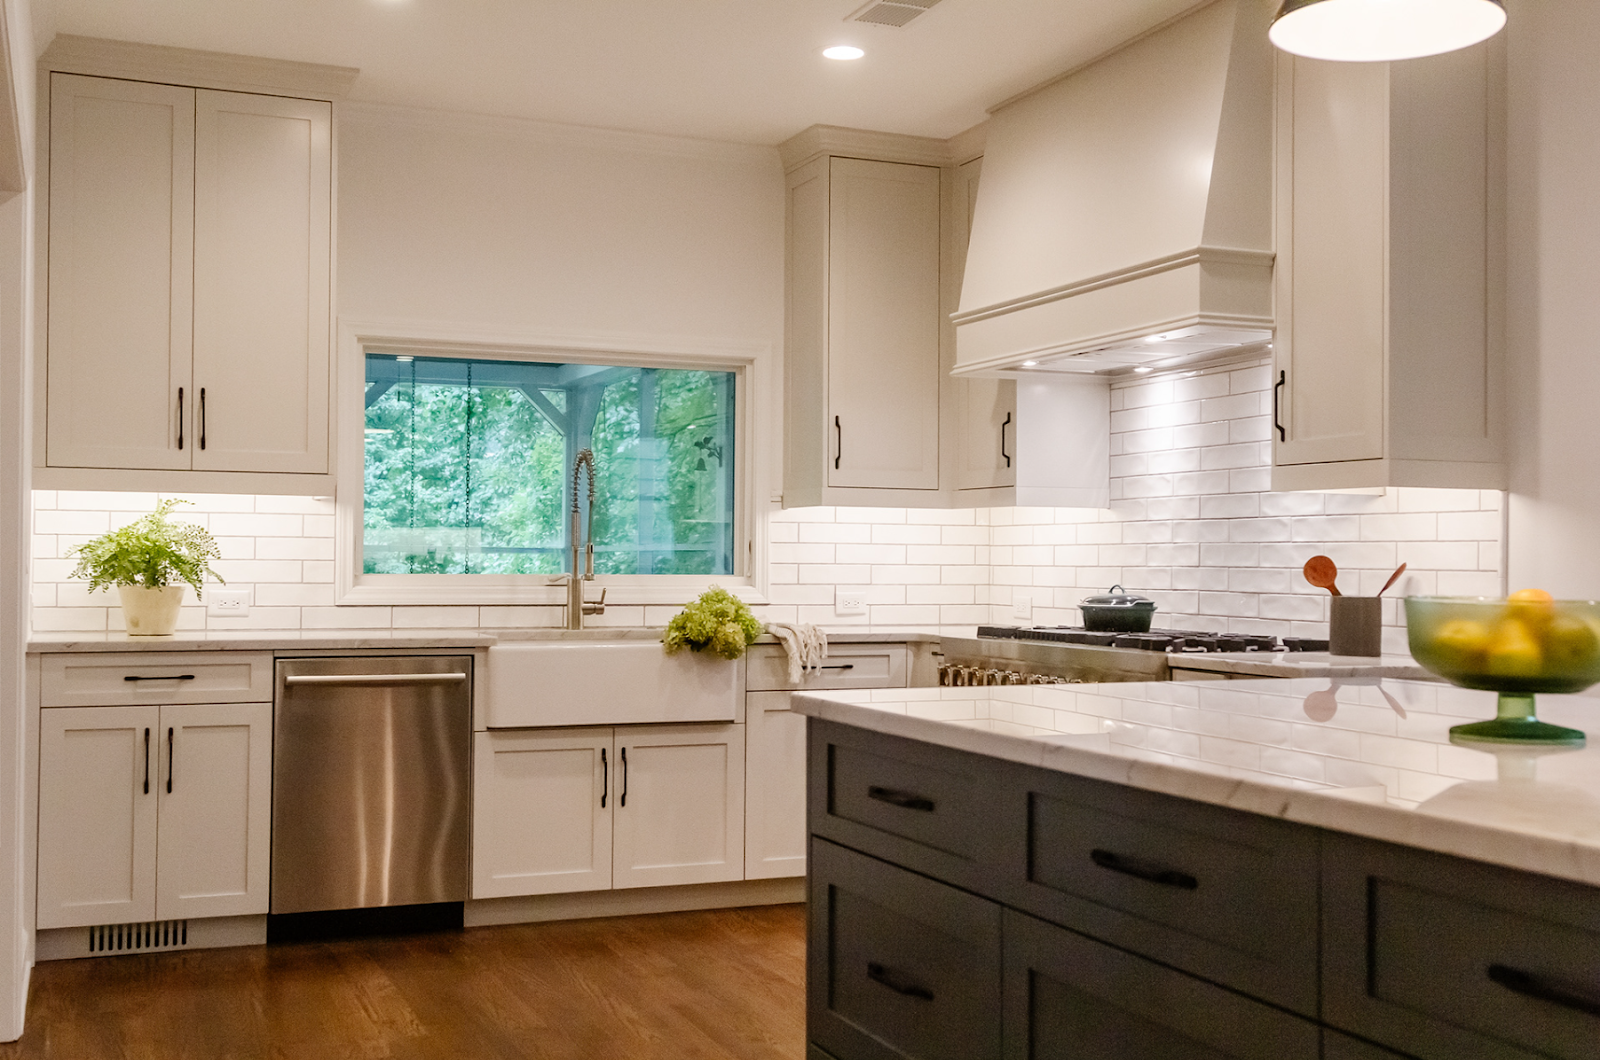 Kitchen renovation (featuring new countertops, cabinetry, and range hood) at this Atlanta home